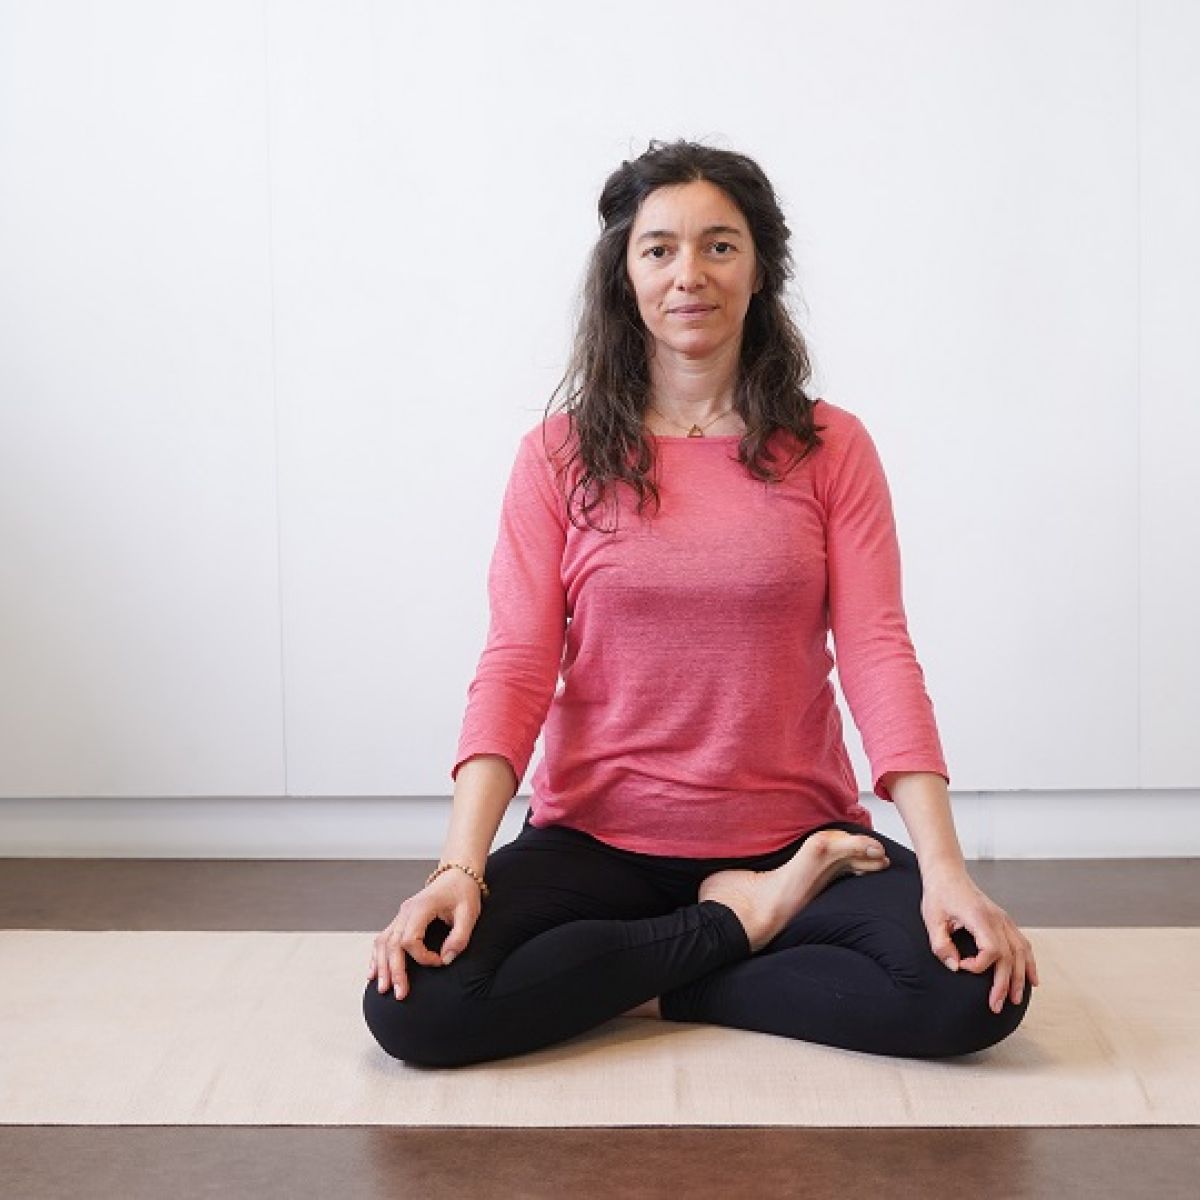 Yoga Lab: Switch off, relax and be at one with your breath